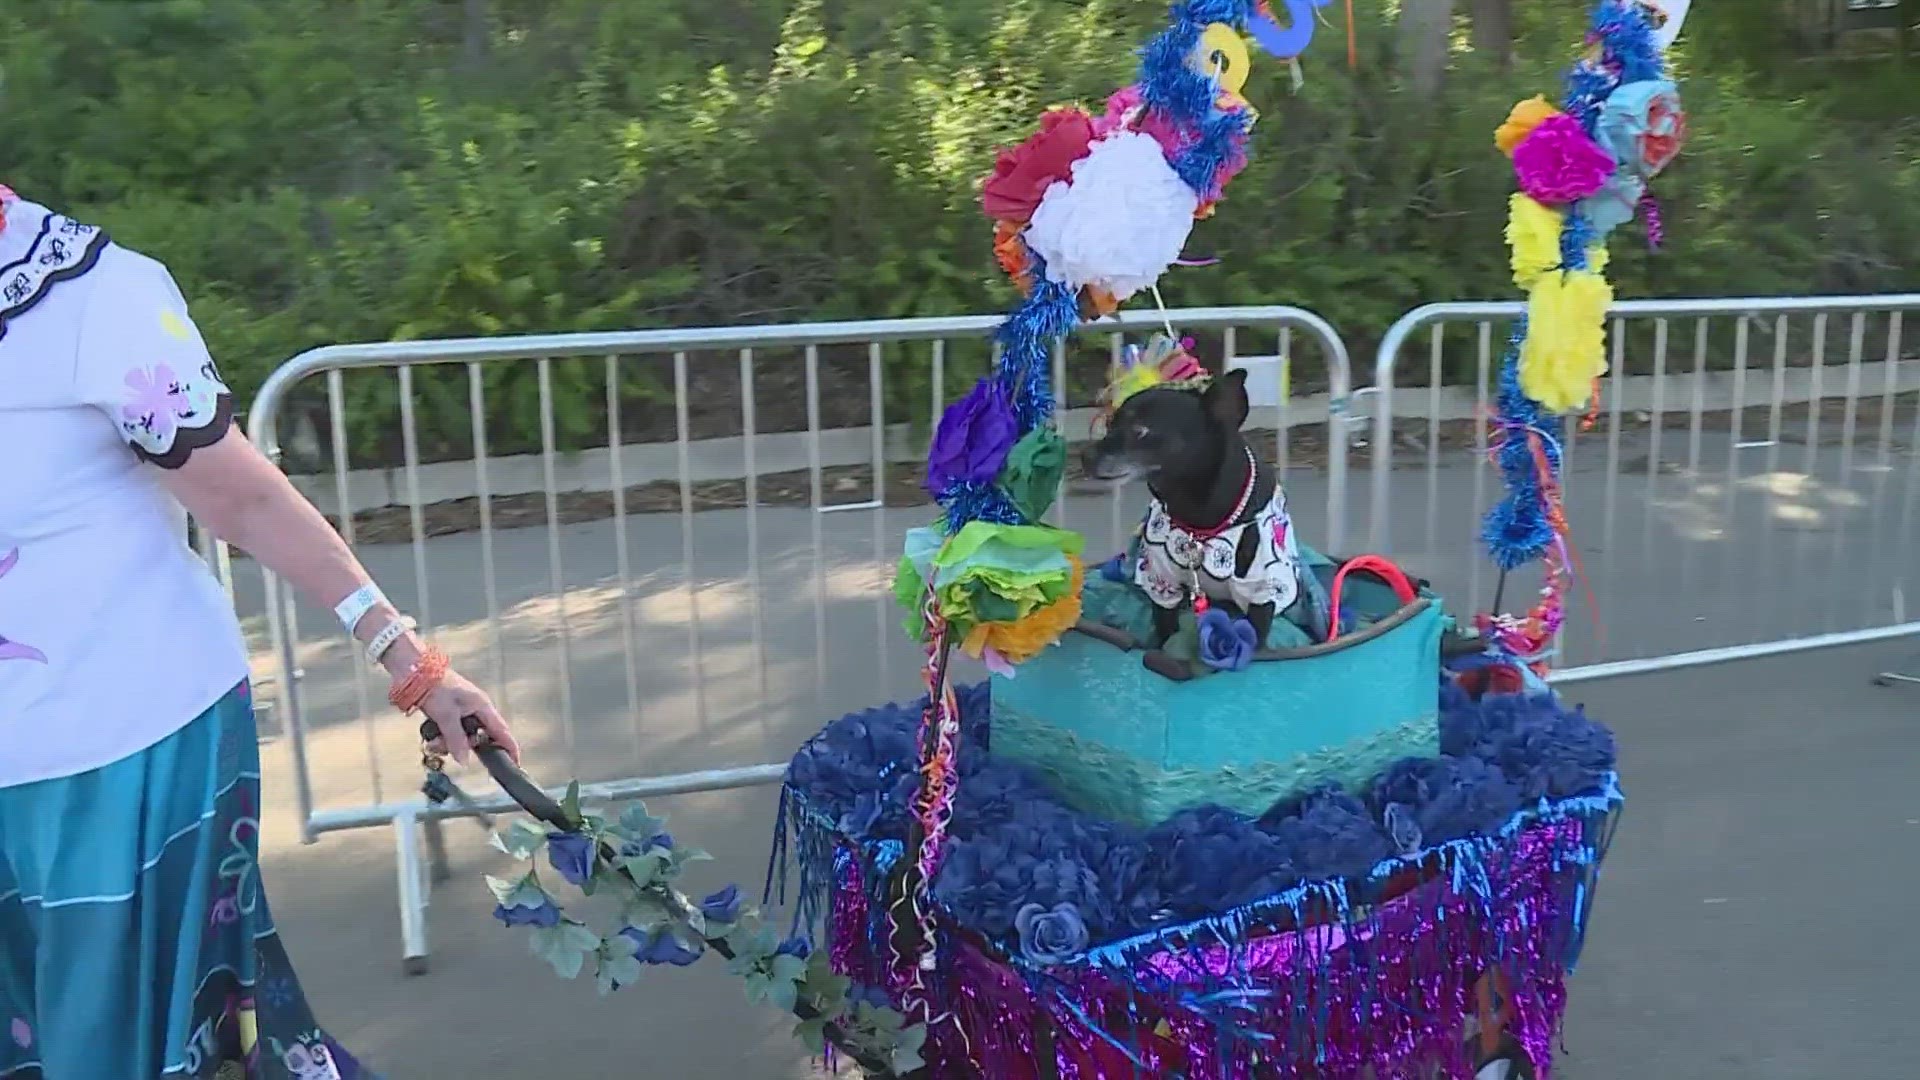 There were more than 800 doggos dressed in costumes and on floats in the 2023 Fiesta Pooch Parade.